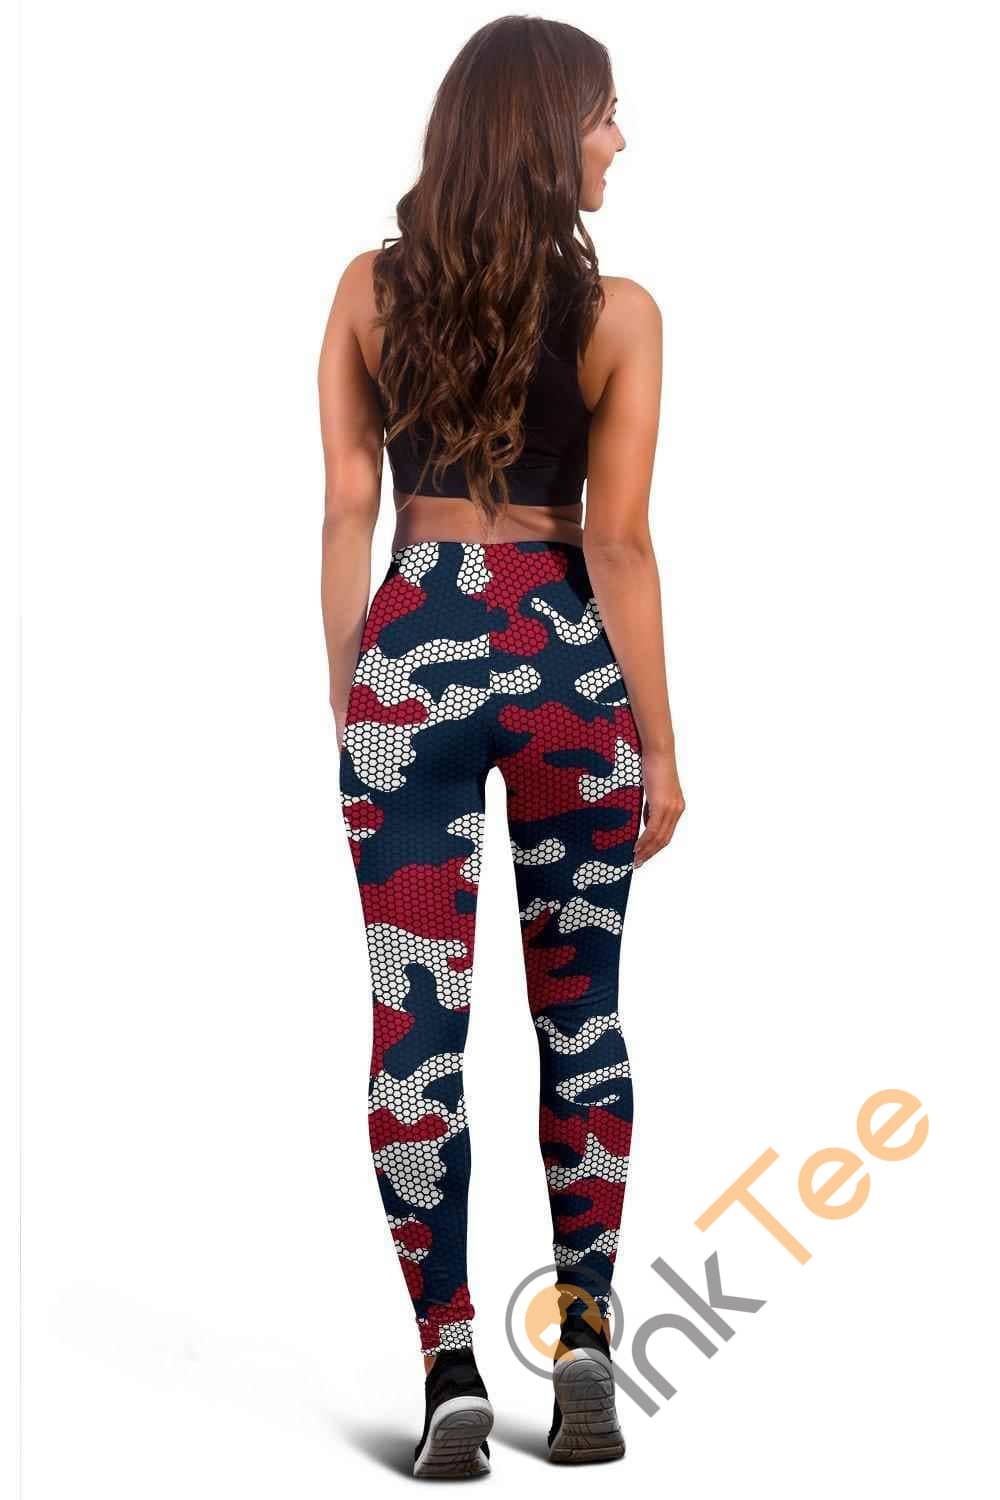 Inktee Store - New England Patriots Inspired Hex Camo 3D All Over Print For Yoga Fitness Fashion Women'S Leggings Image